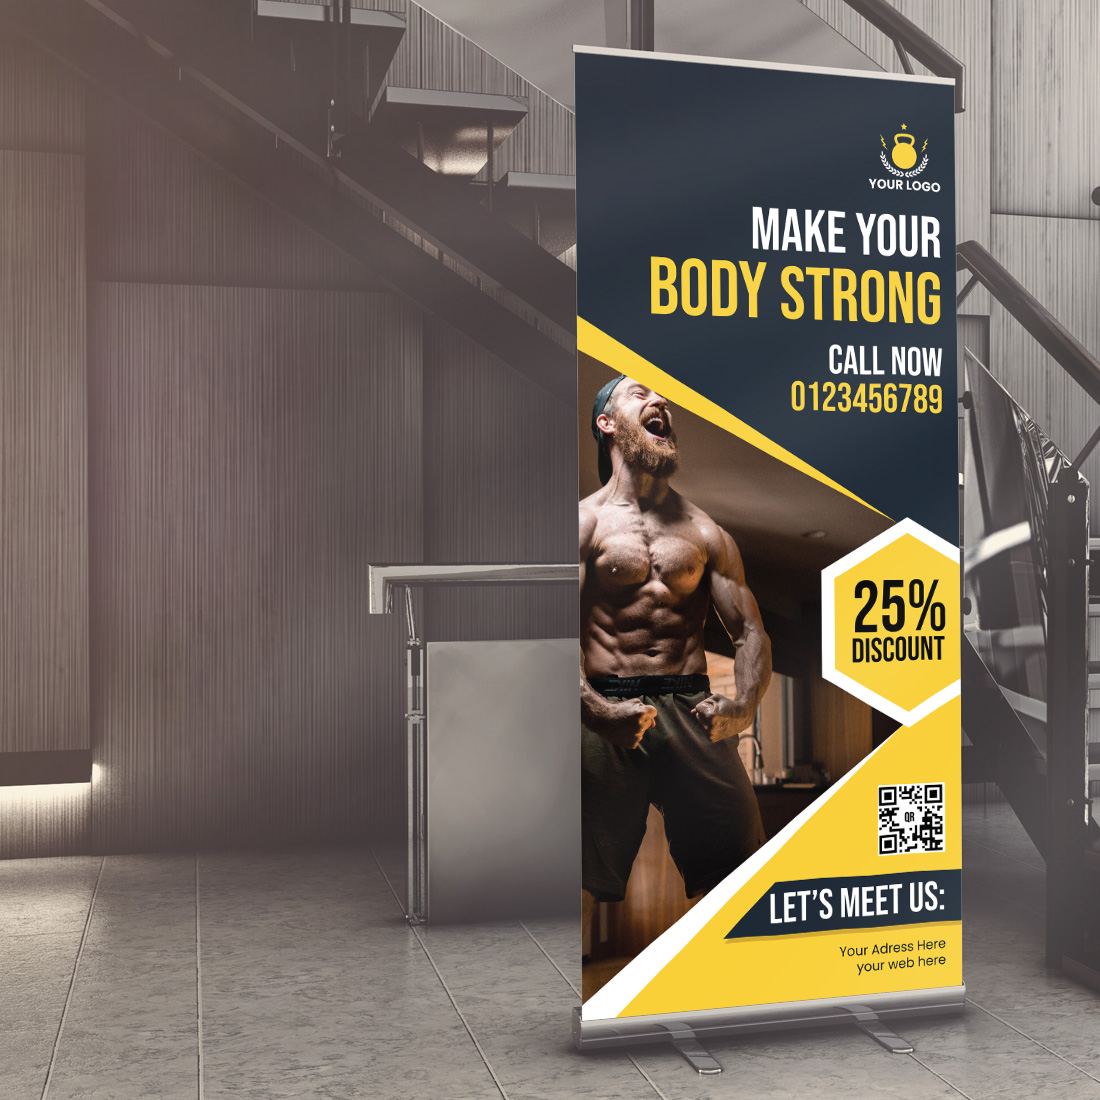 Roll up banner with a picture of a muscular man.